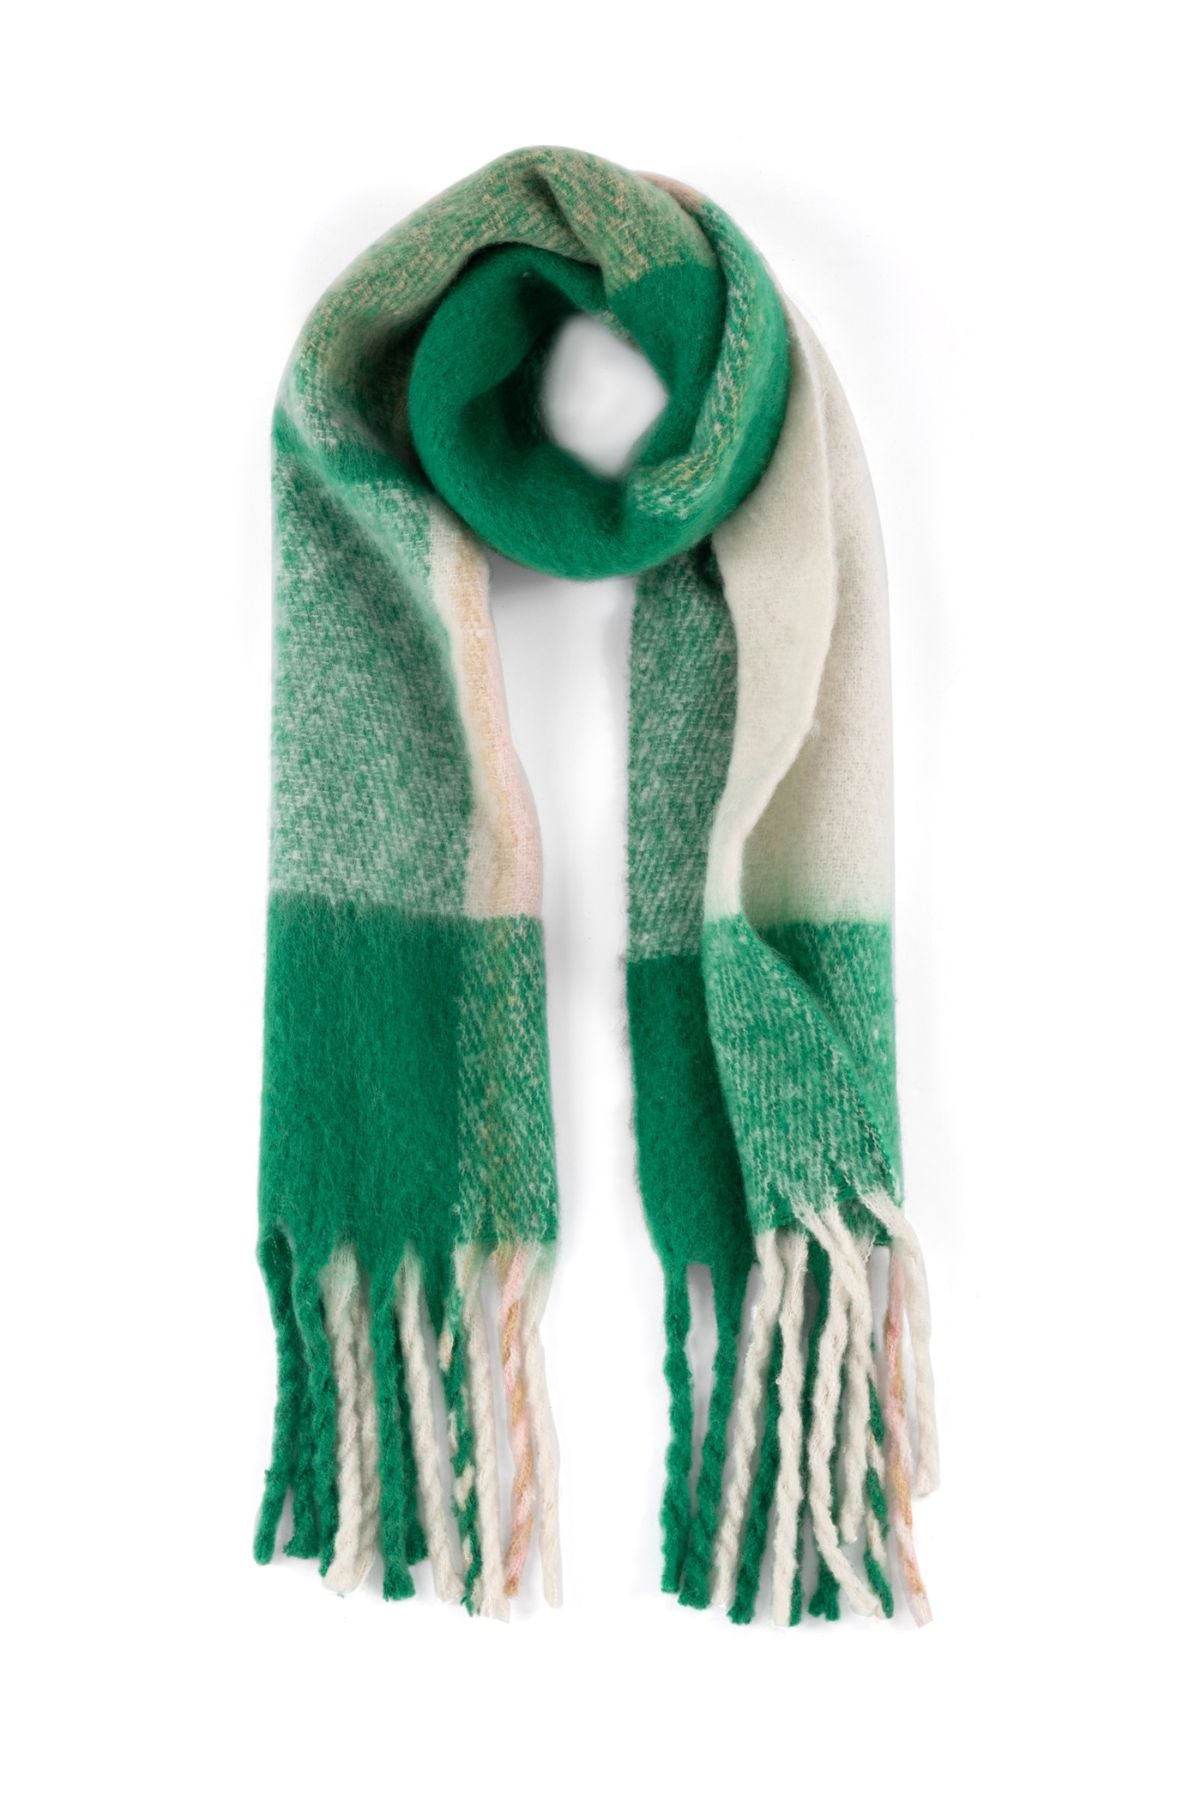 Green and white plaid scarf